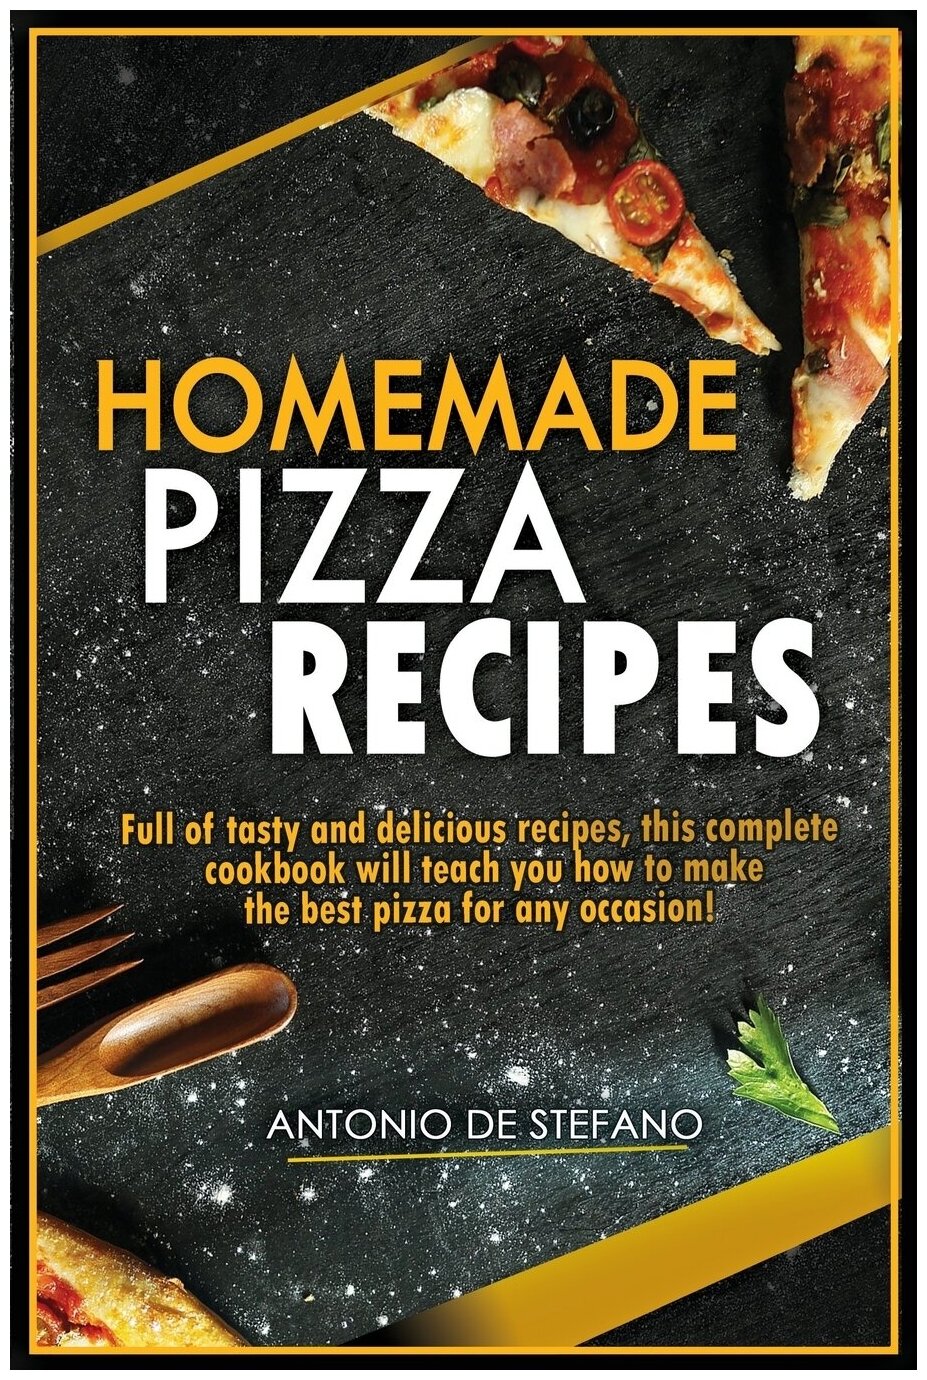 Homemade Pizza Recipes. Full of tasty and delicious recipes, this complete and detailed cookbook will teach you how to make the best pizza for every …